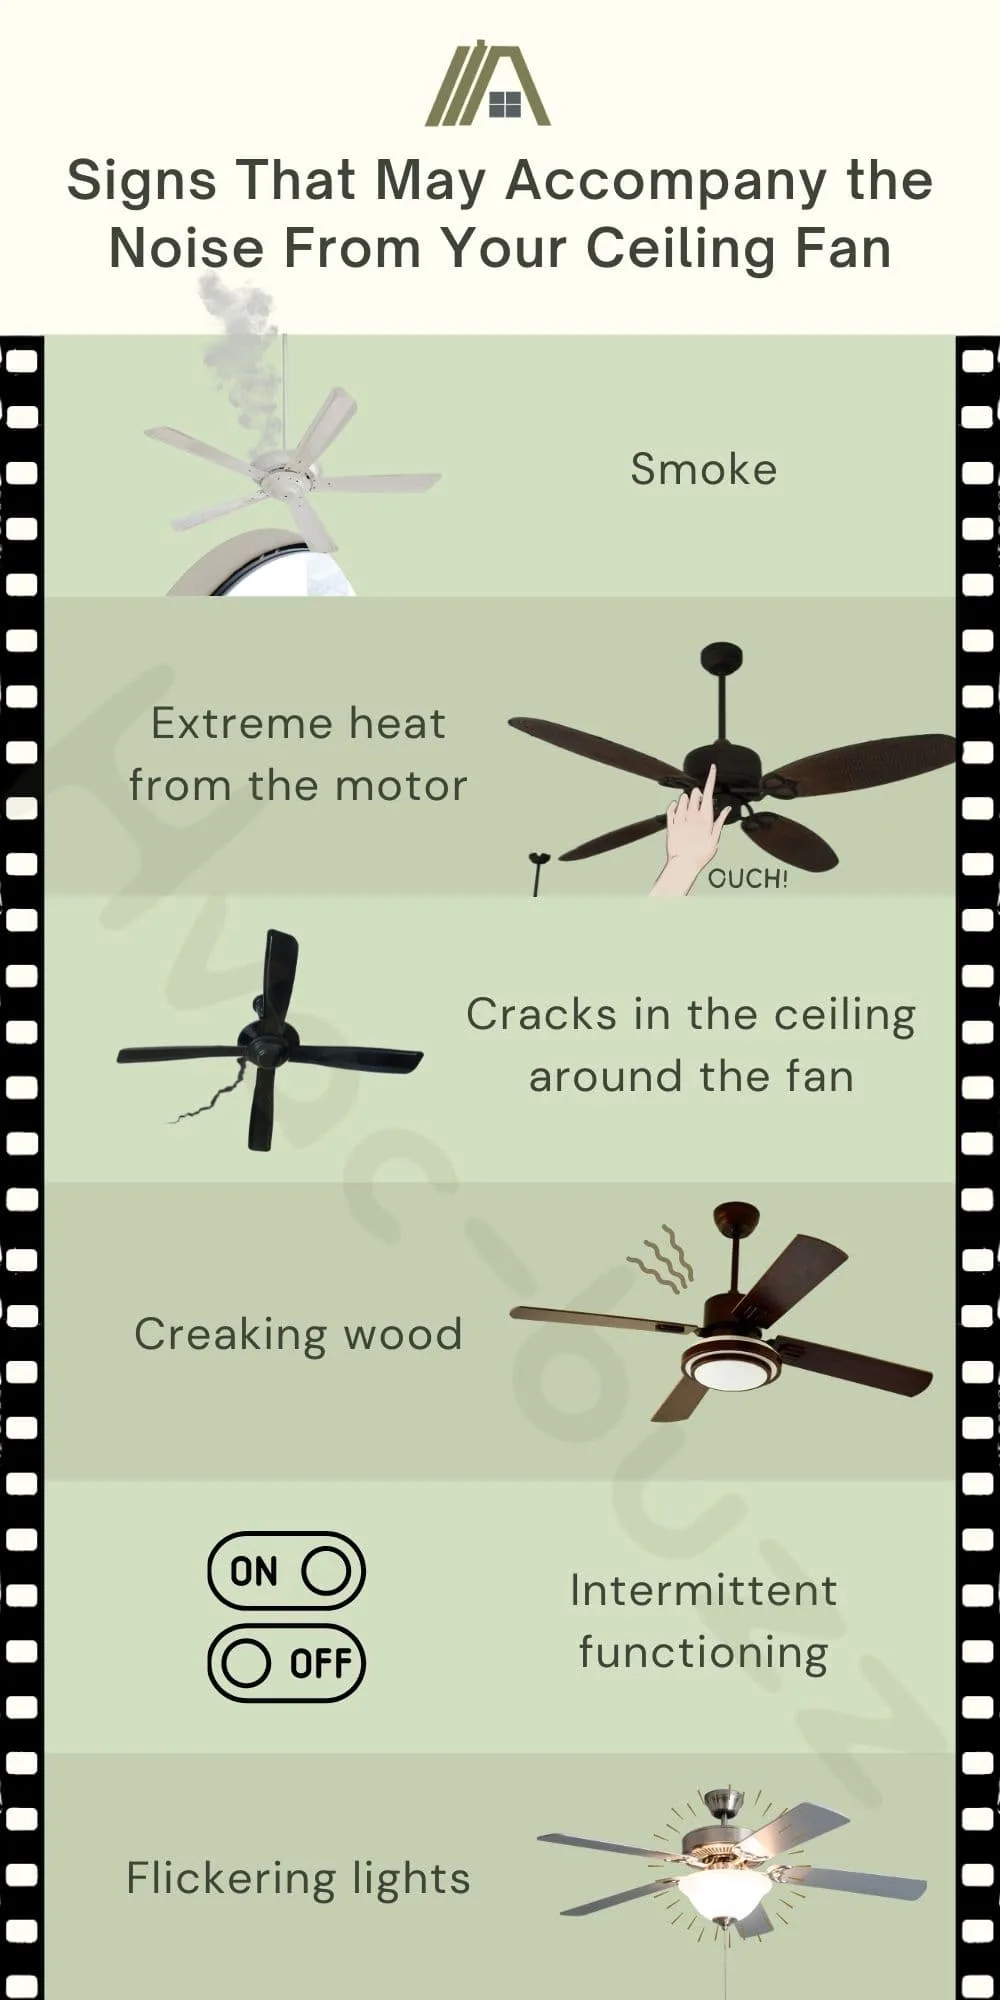 Signs That May Accompany the Noise From Your Ceiling Fan